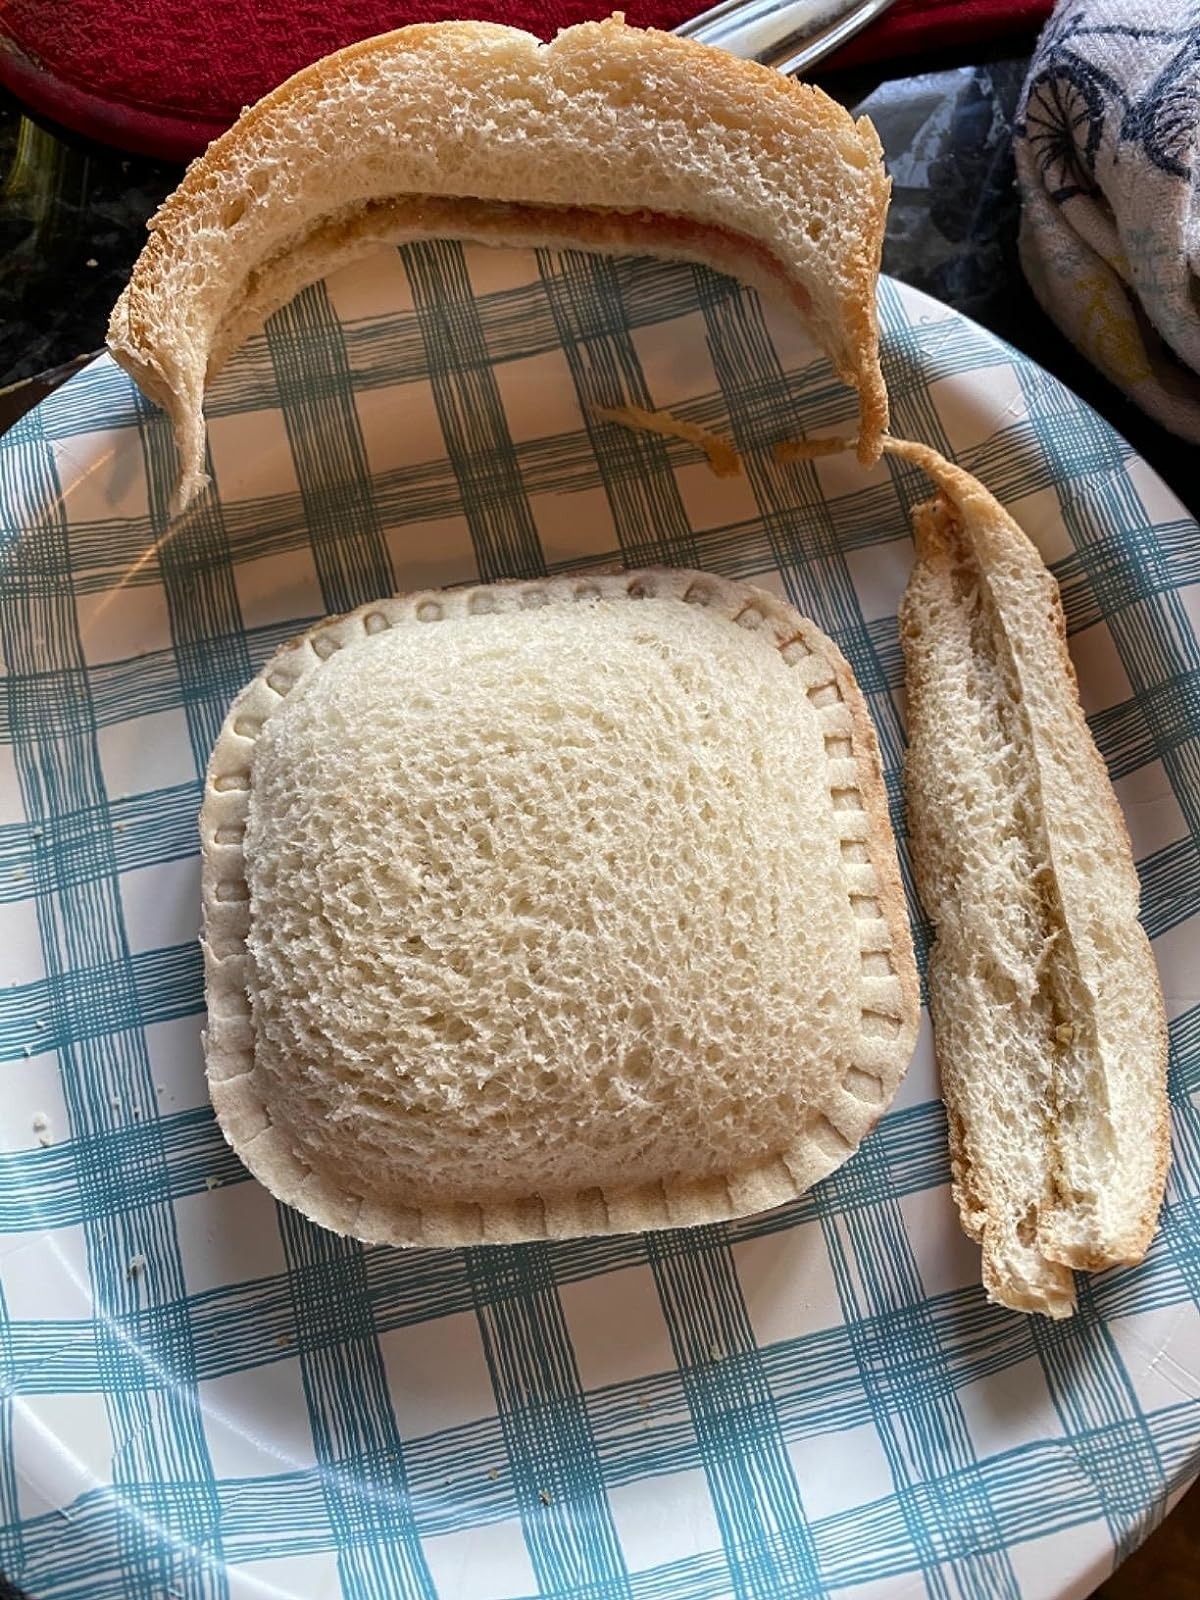 Reviewer image of sandwich with the crust cut off using the cutter